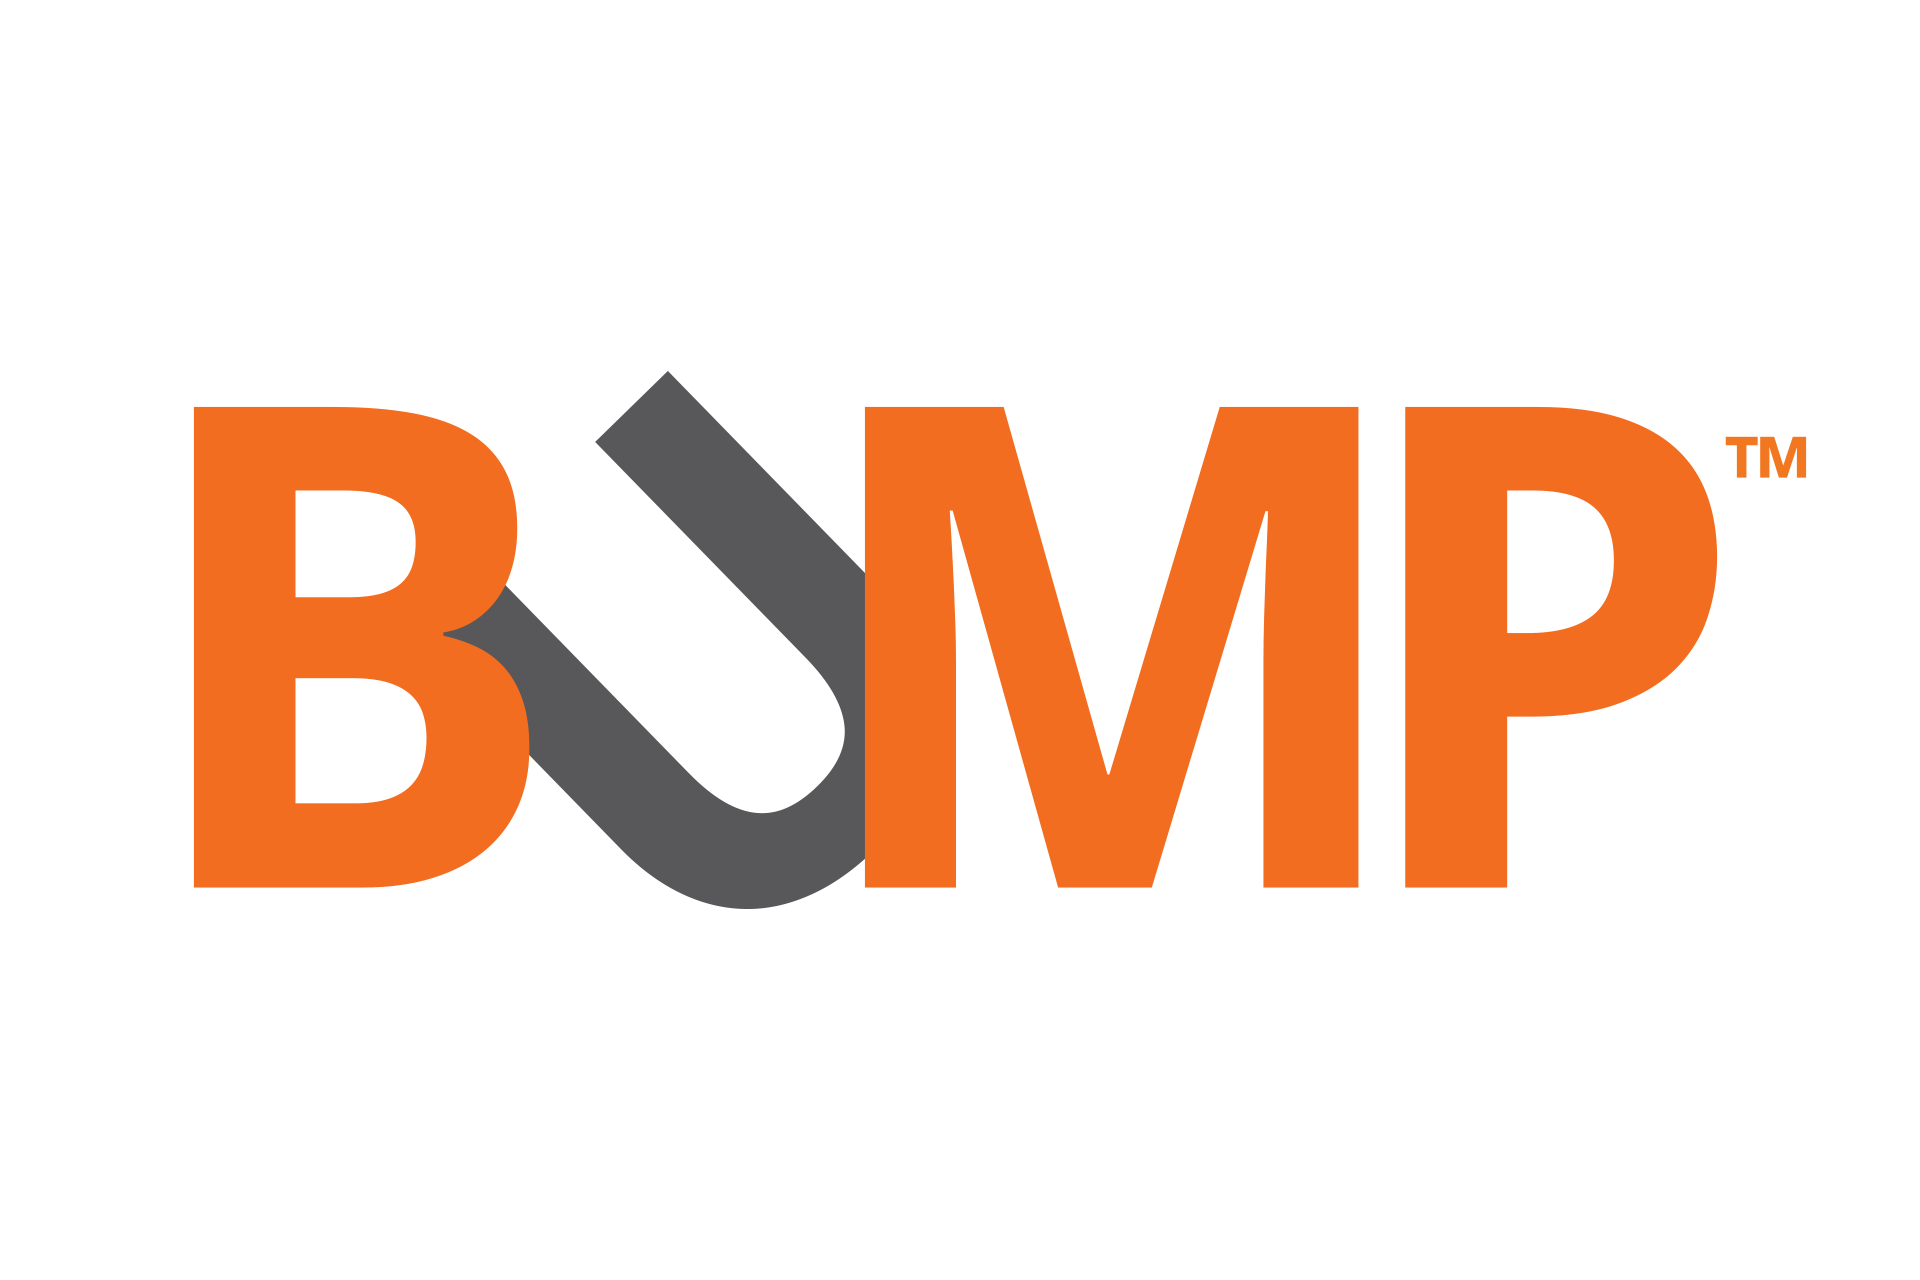 BUMP color logo created by Vendi Advertising